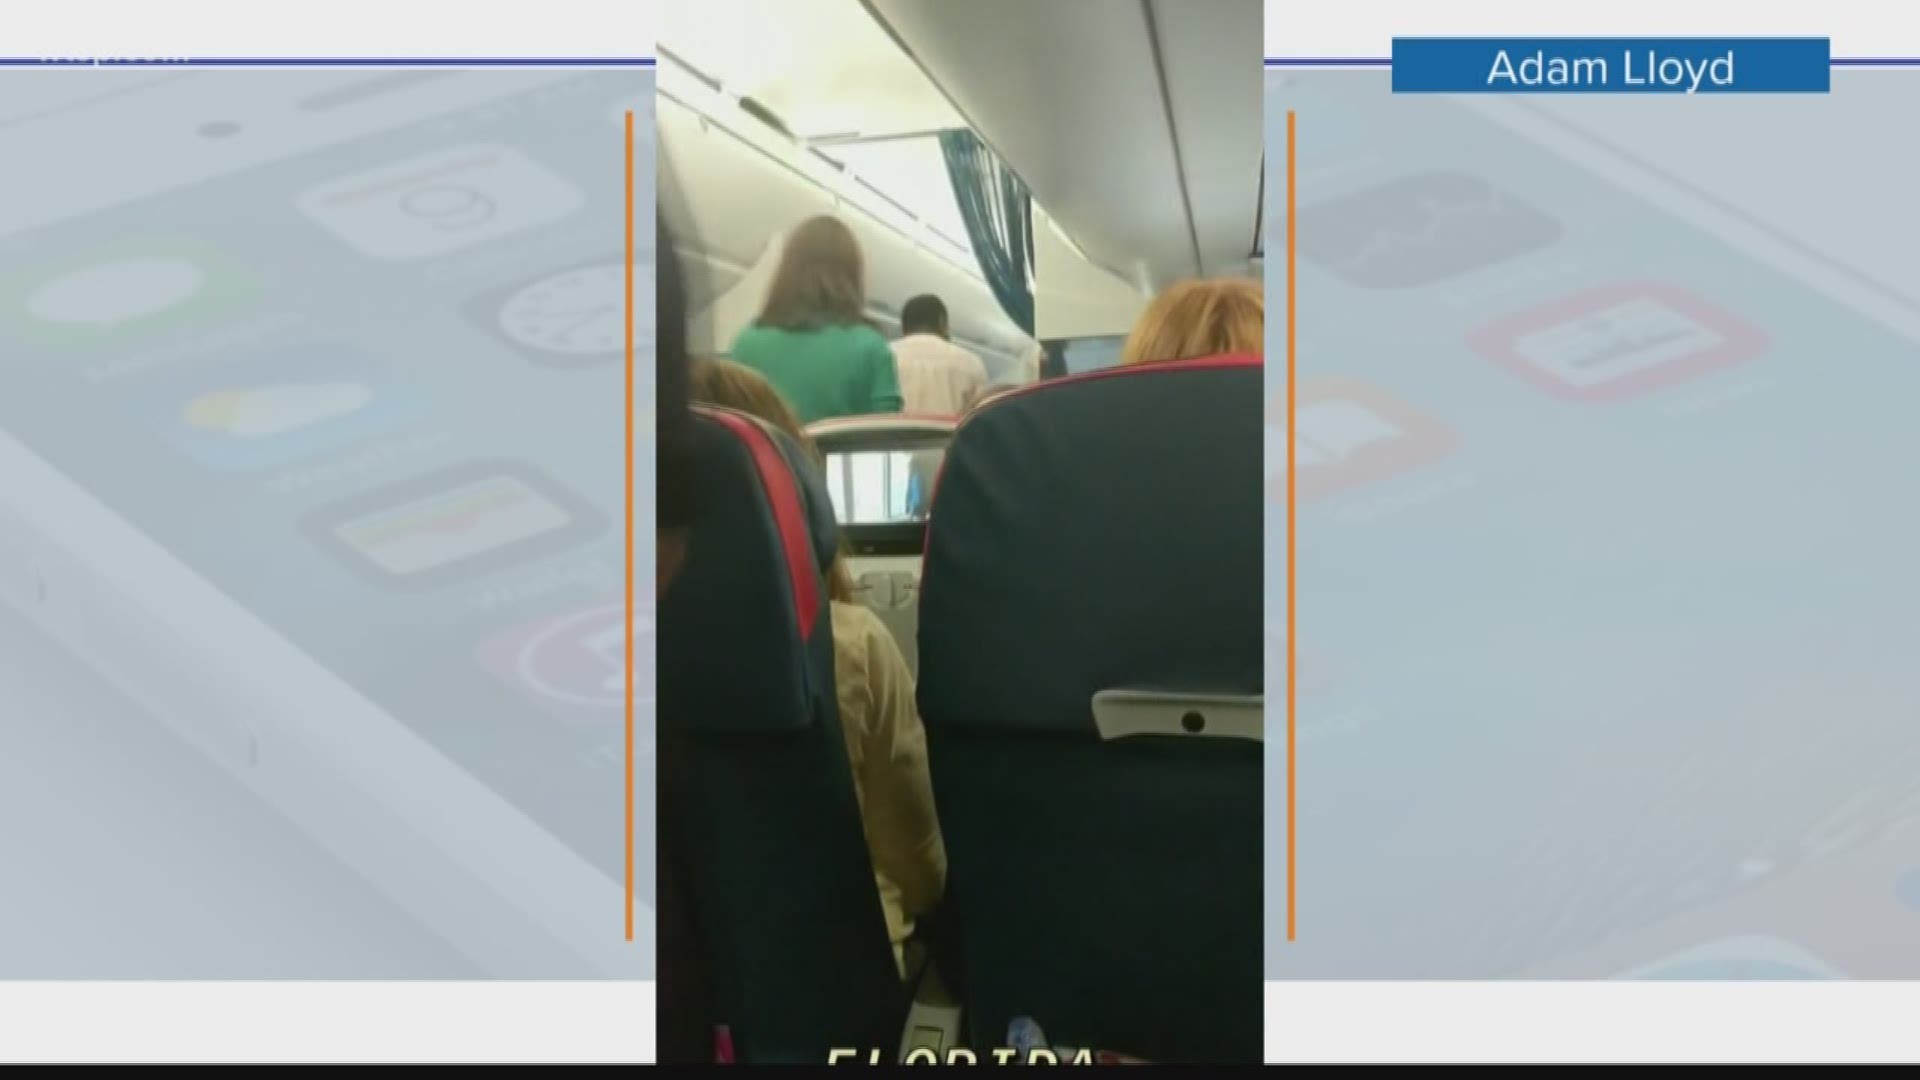 A woman made it onto a Delta flight Saturday at Orlando International Airport without a boarding pass, delaying the plane's departure.